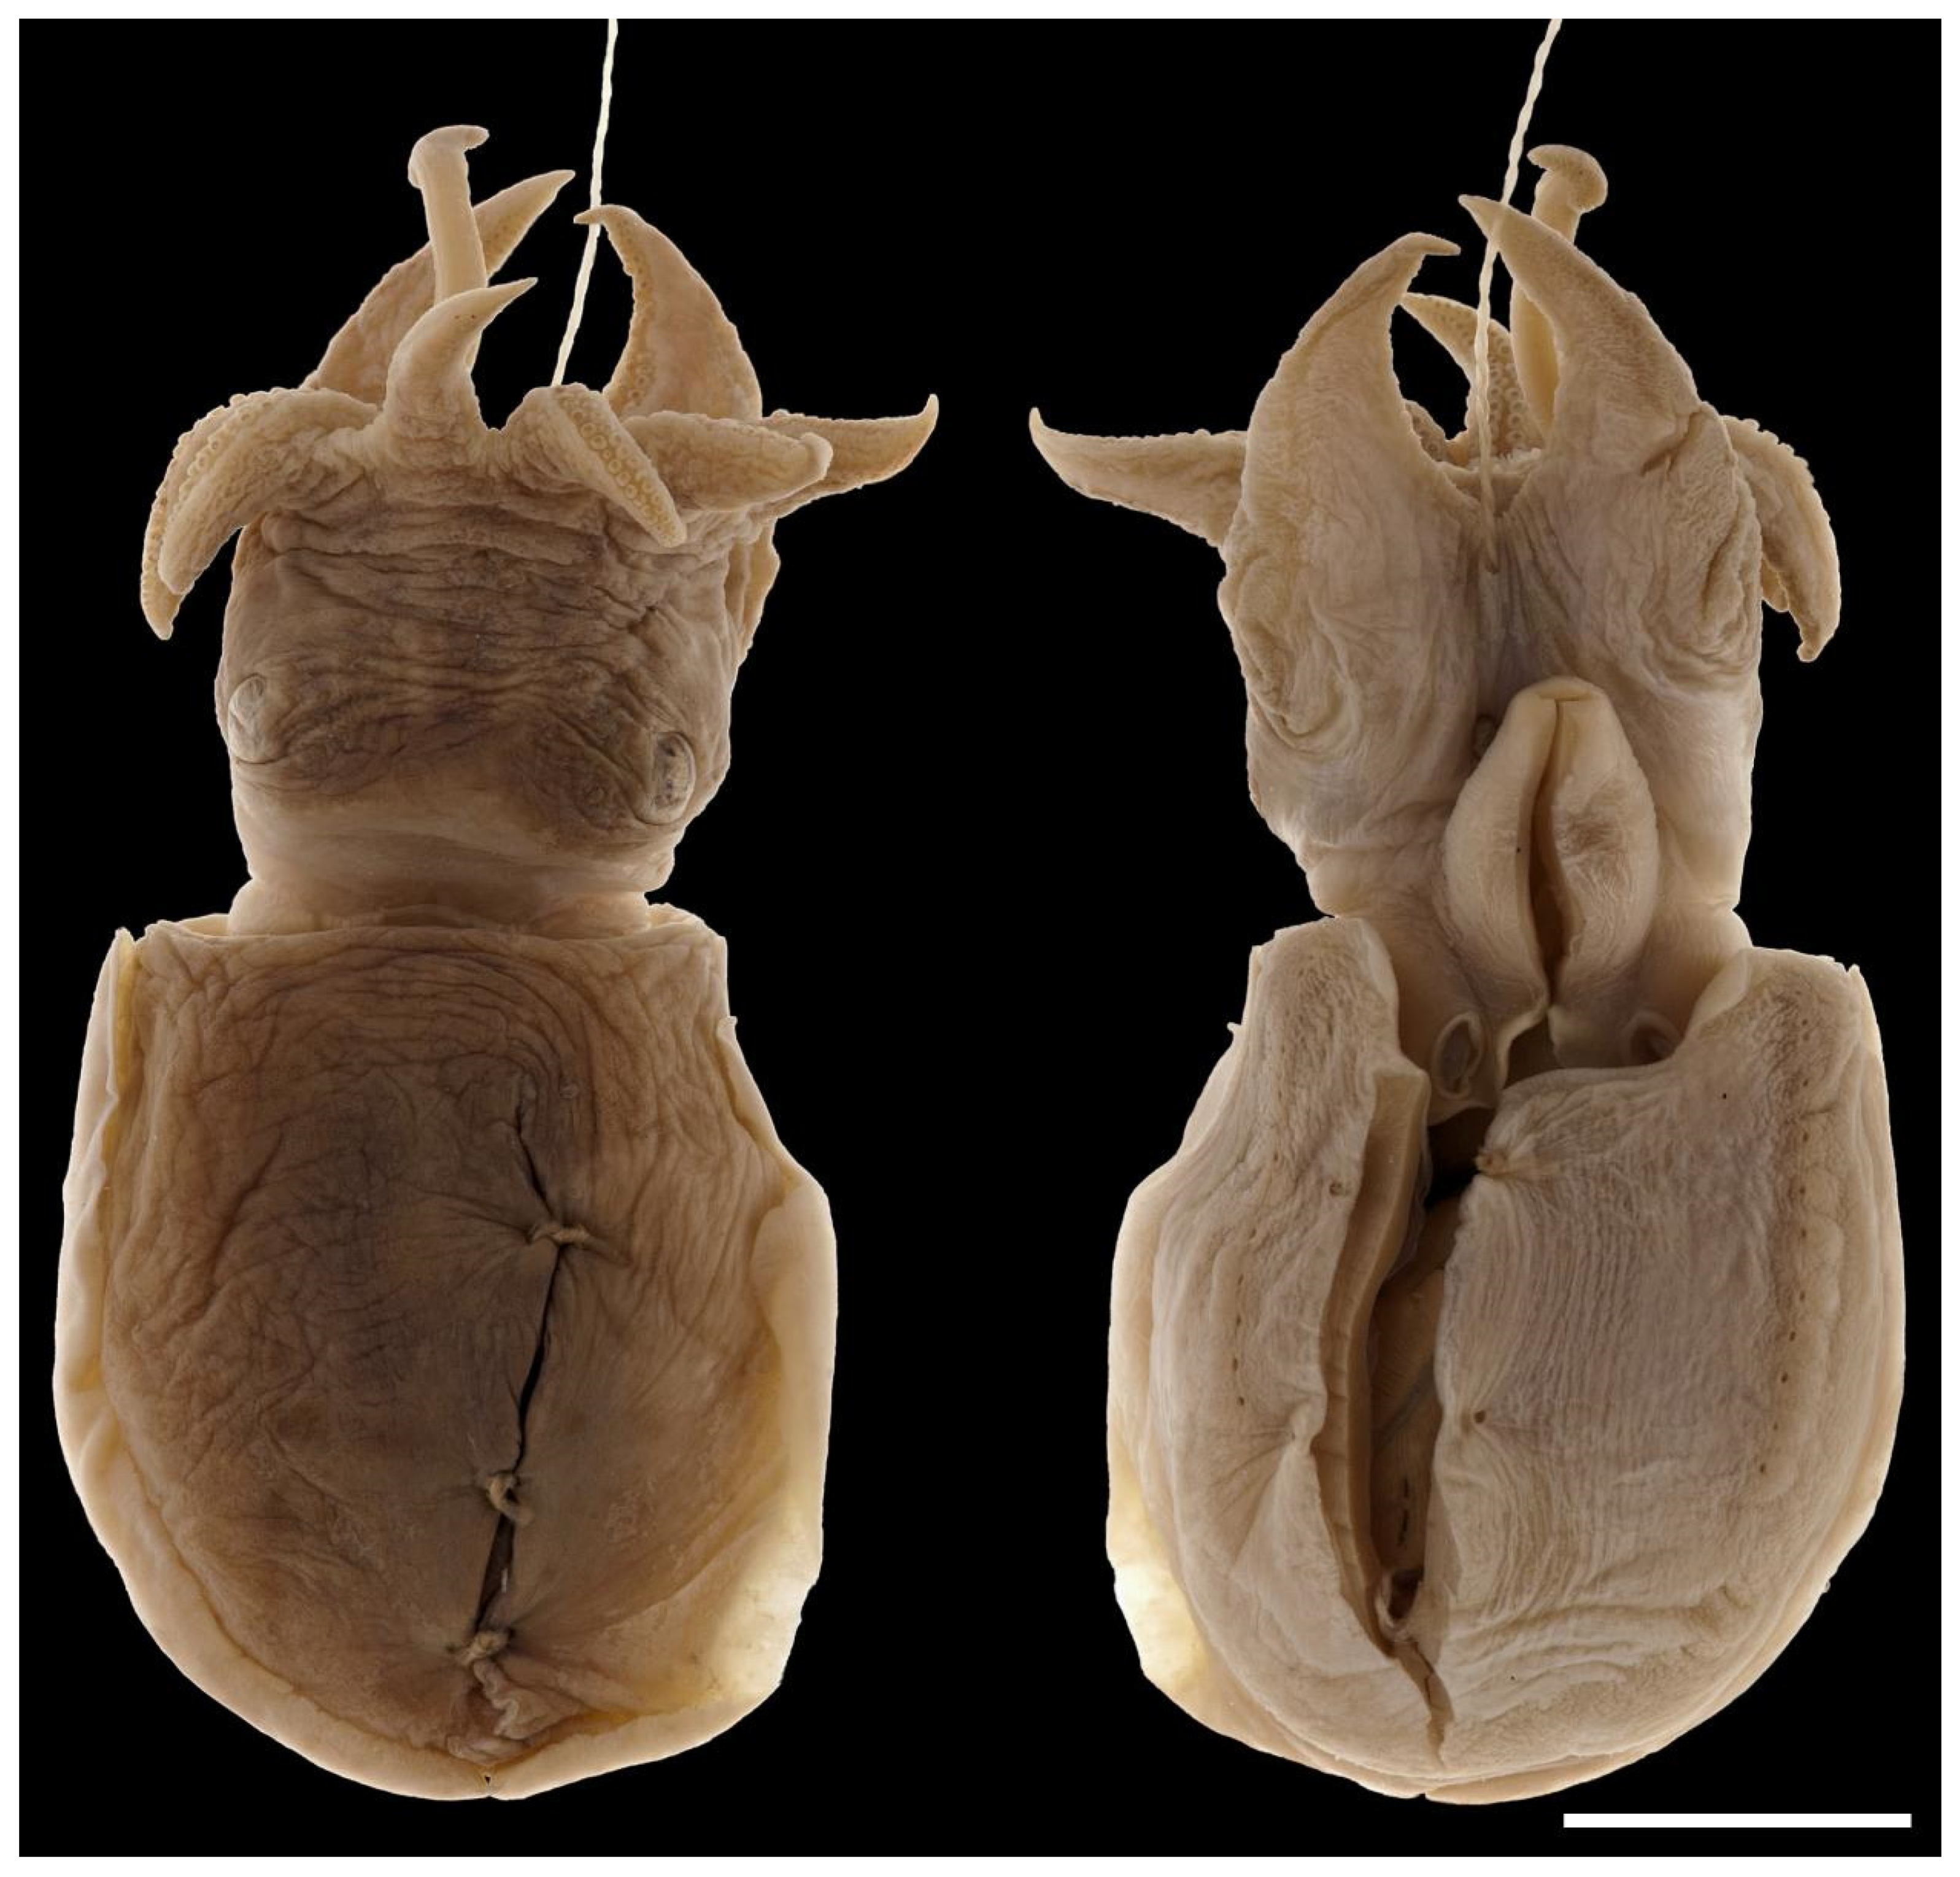 Dorsal (left) and ventral (right) views of the holotype of Sepia